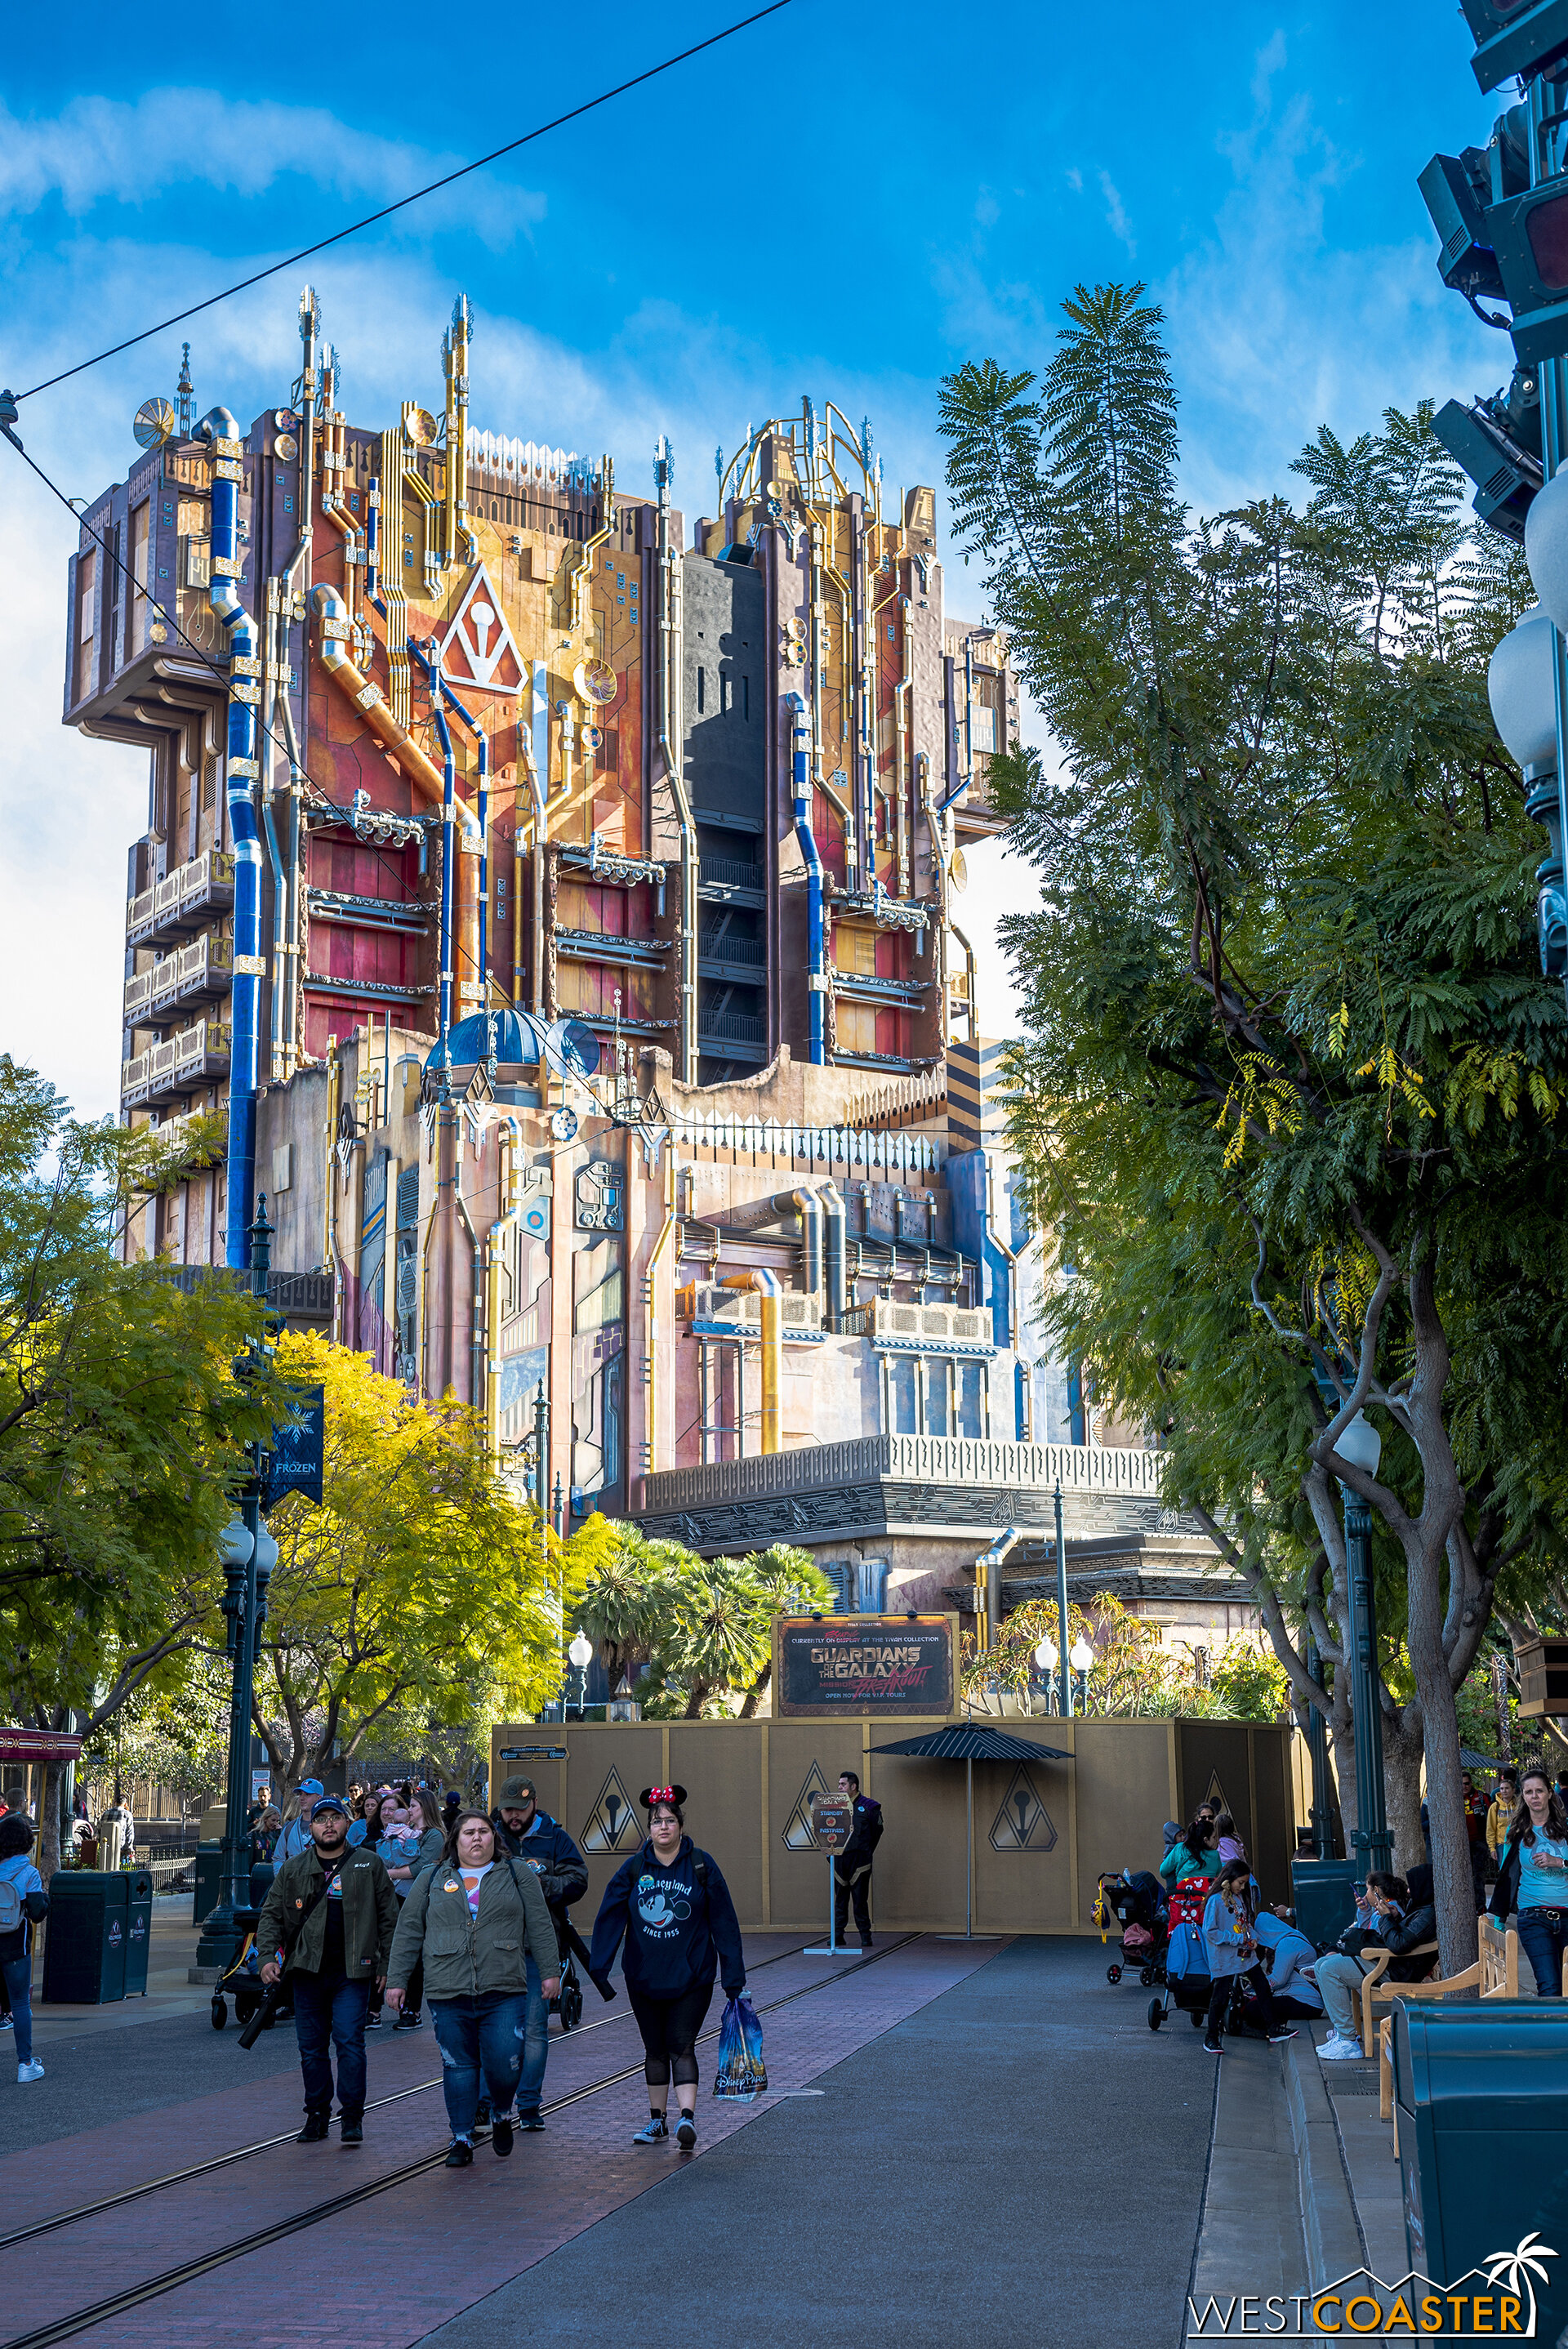  They’re still doing pavement work over here in front of Guardians of the Galaxy too. 